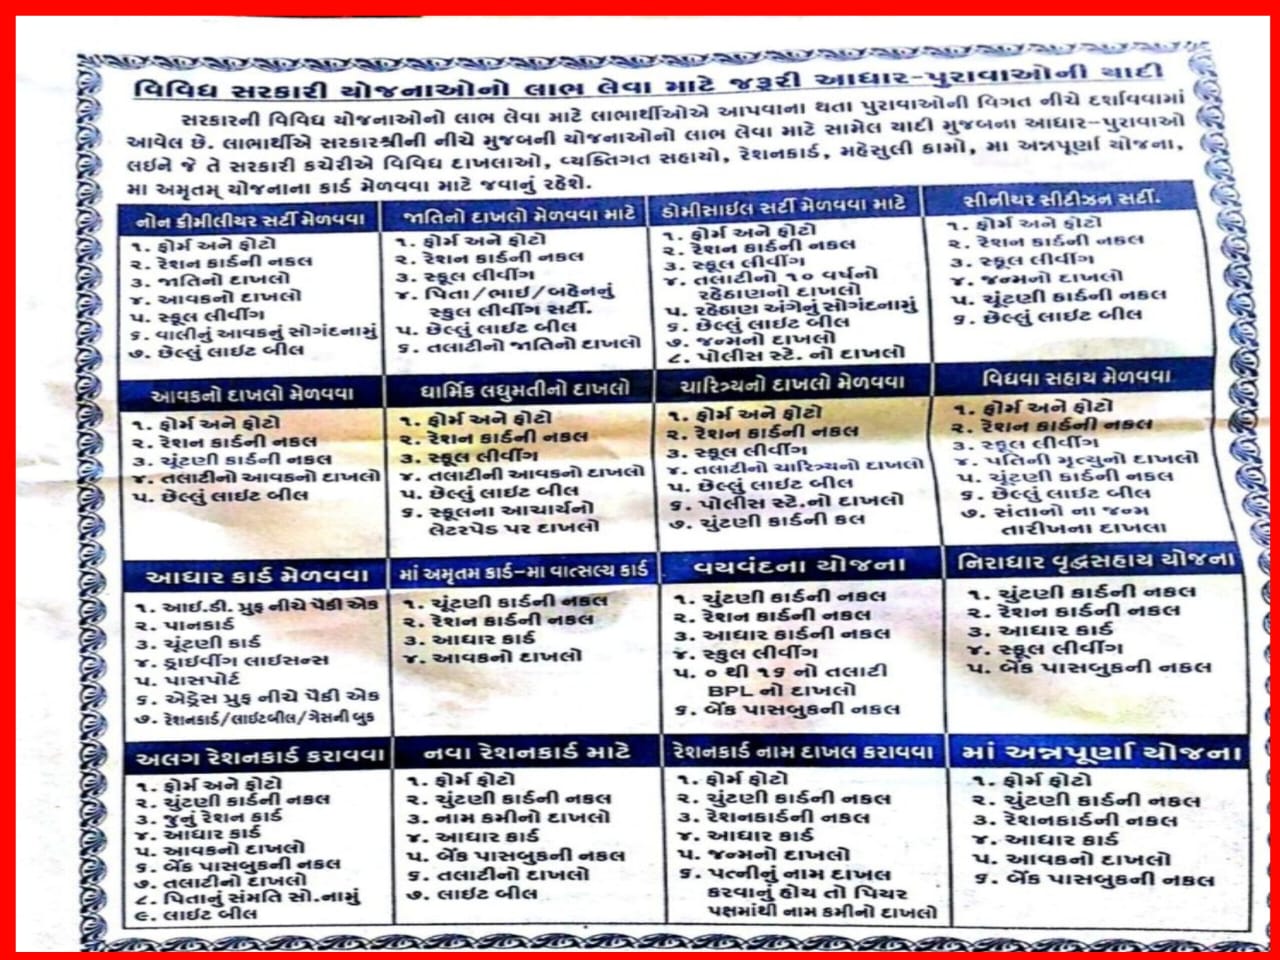 List of Documents for Gujarat Government Schemes